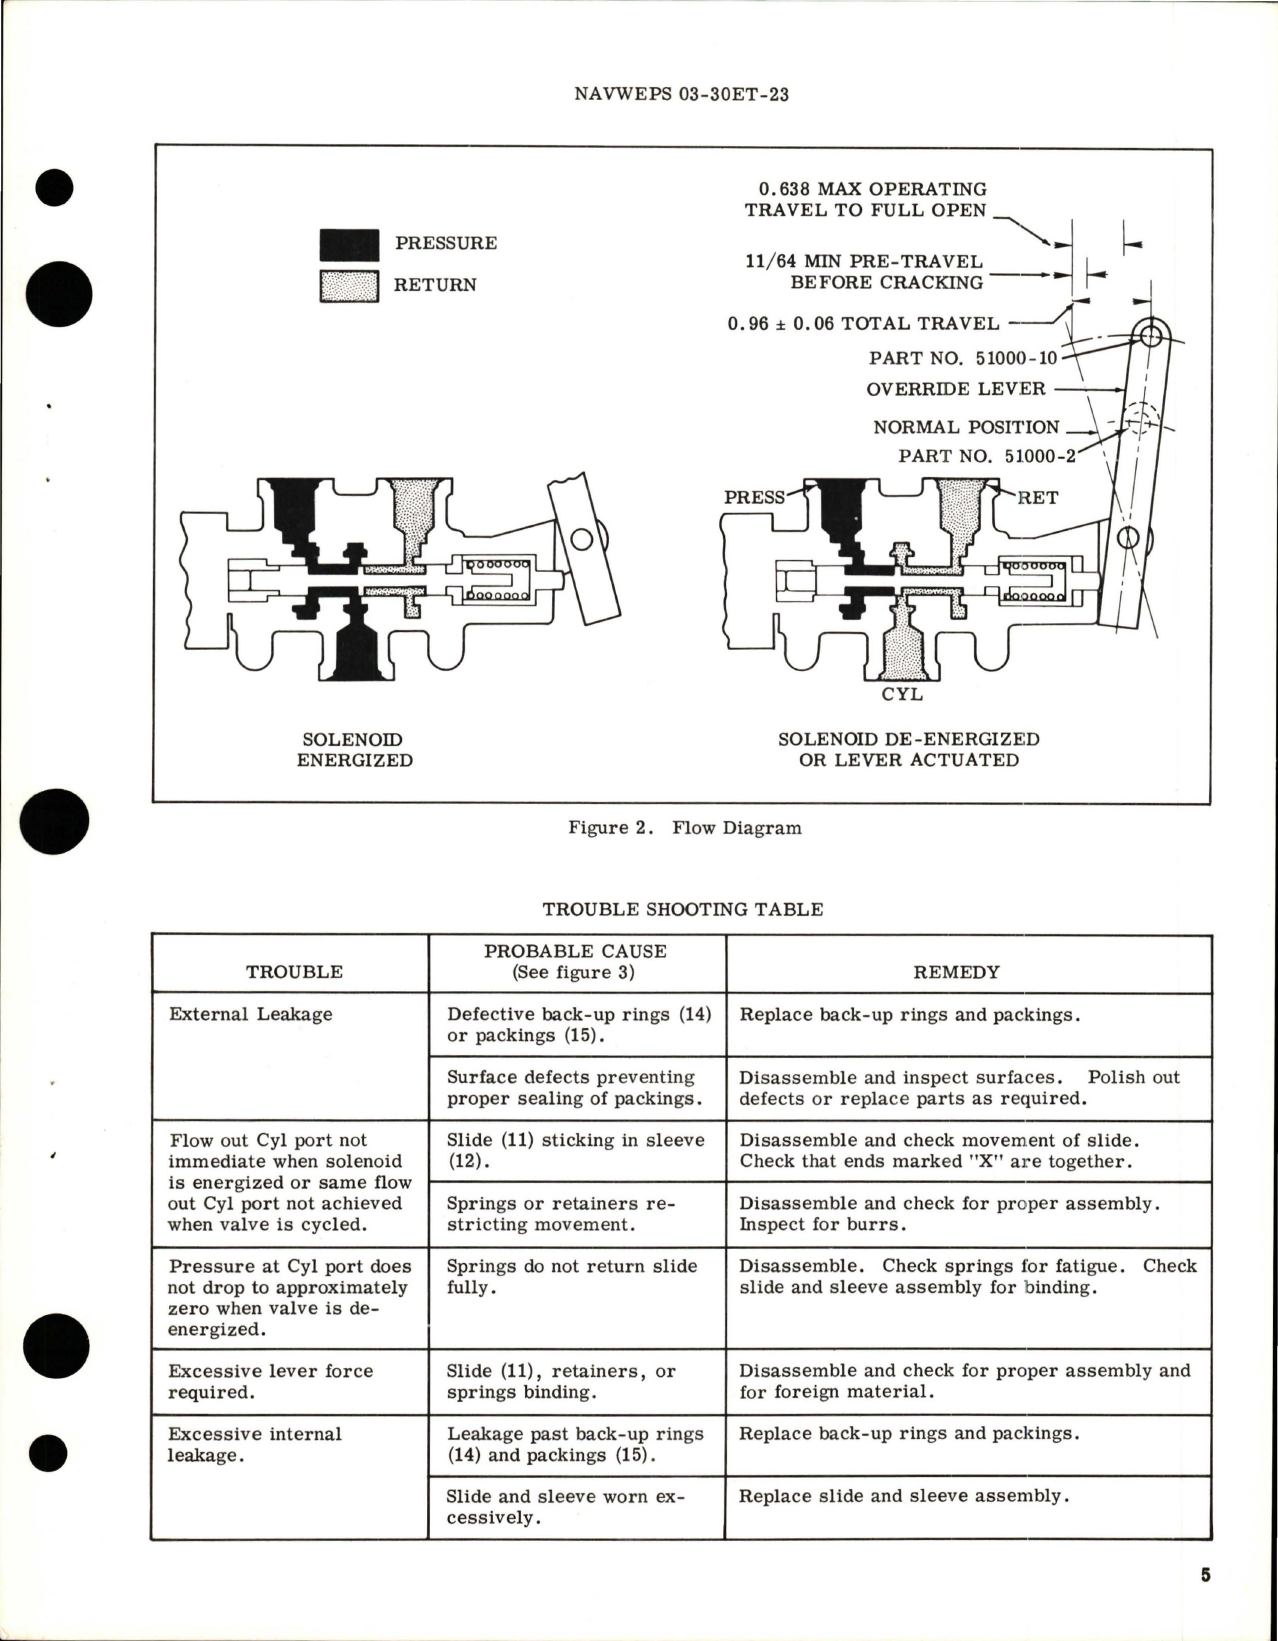 Sample page 5 from AirCorps Library document: Overhaul Instructions with Parts Breakdown for Hydraulic Solenoid Control Valve - Parts 51000-2 and 51000-10